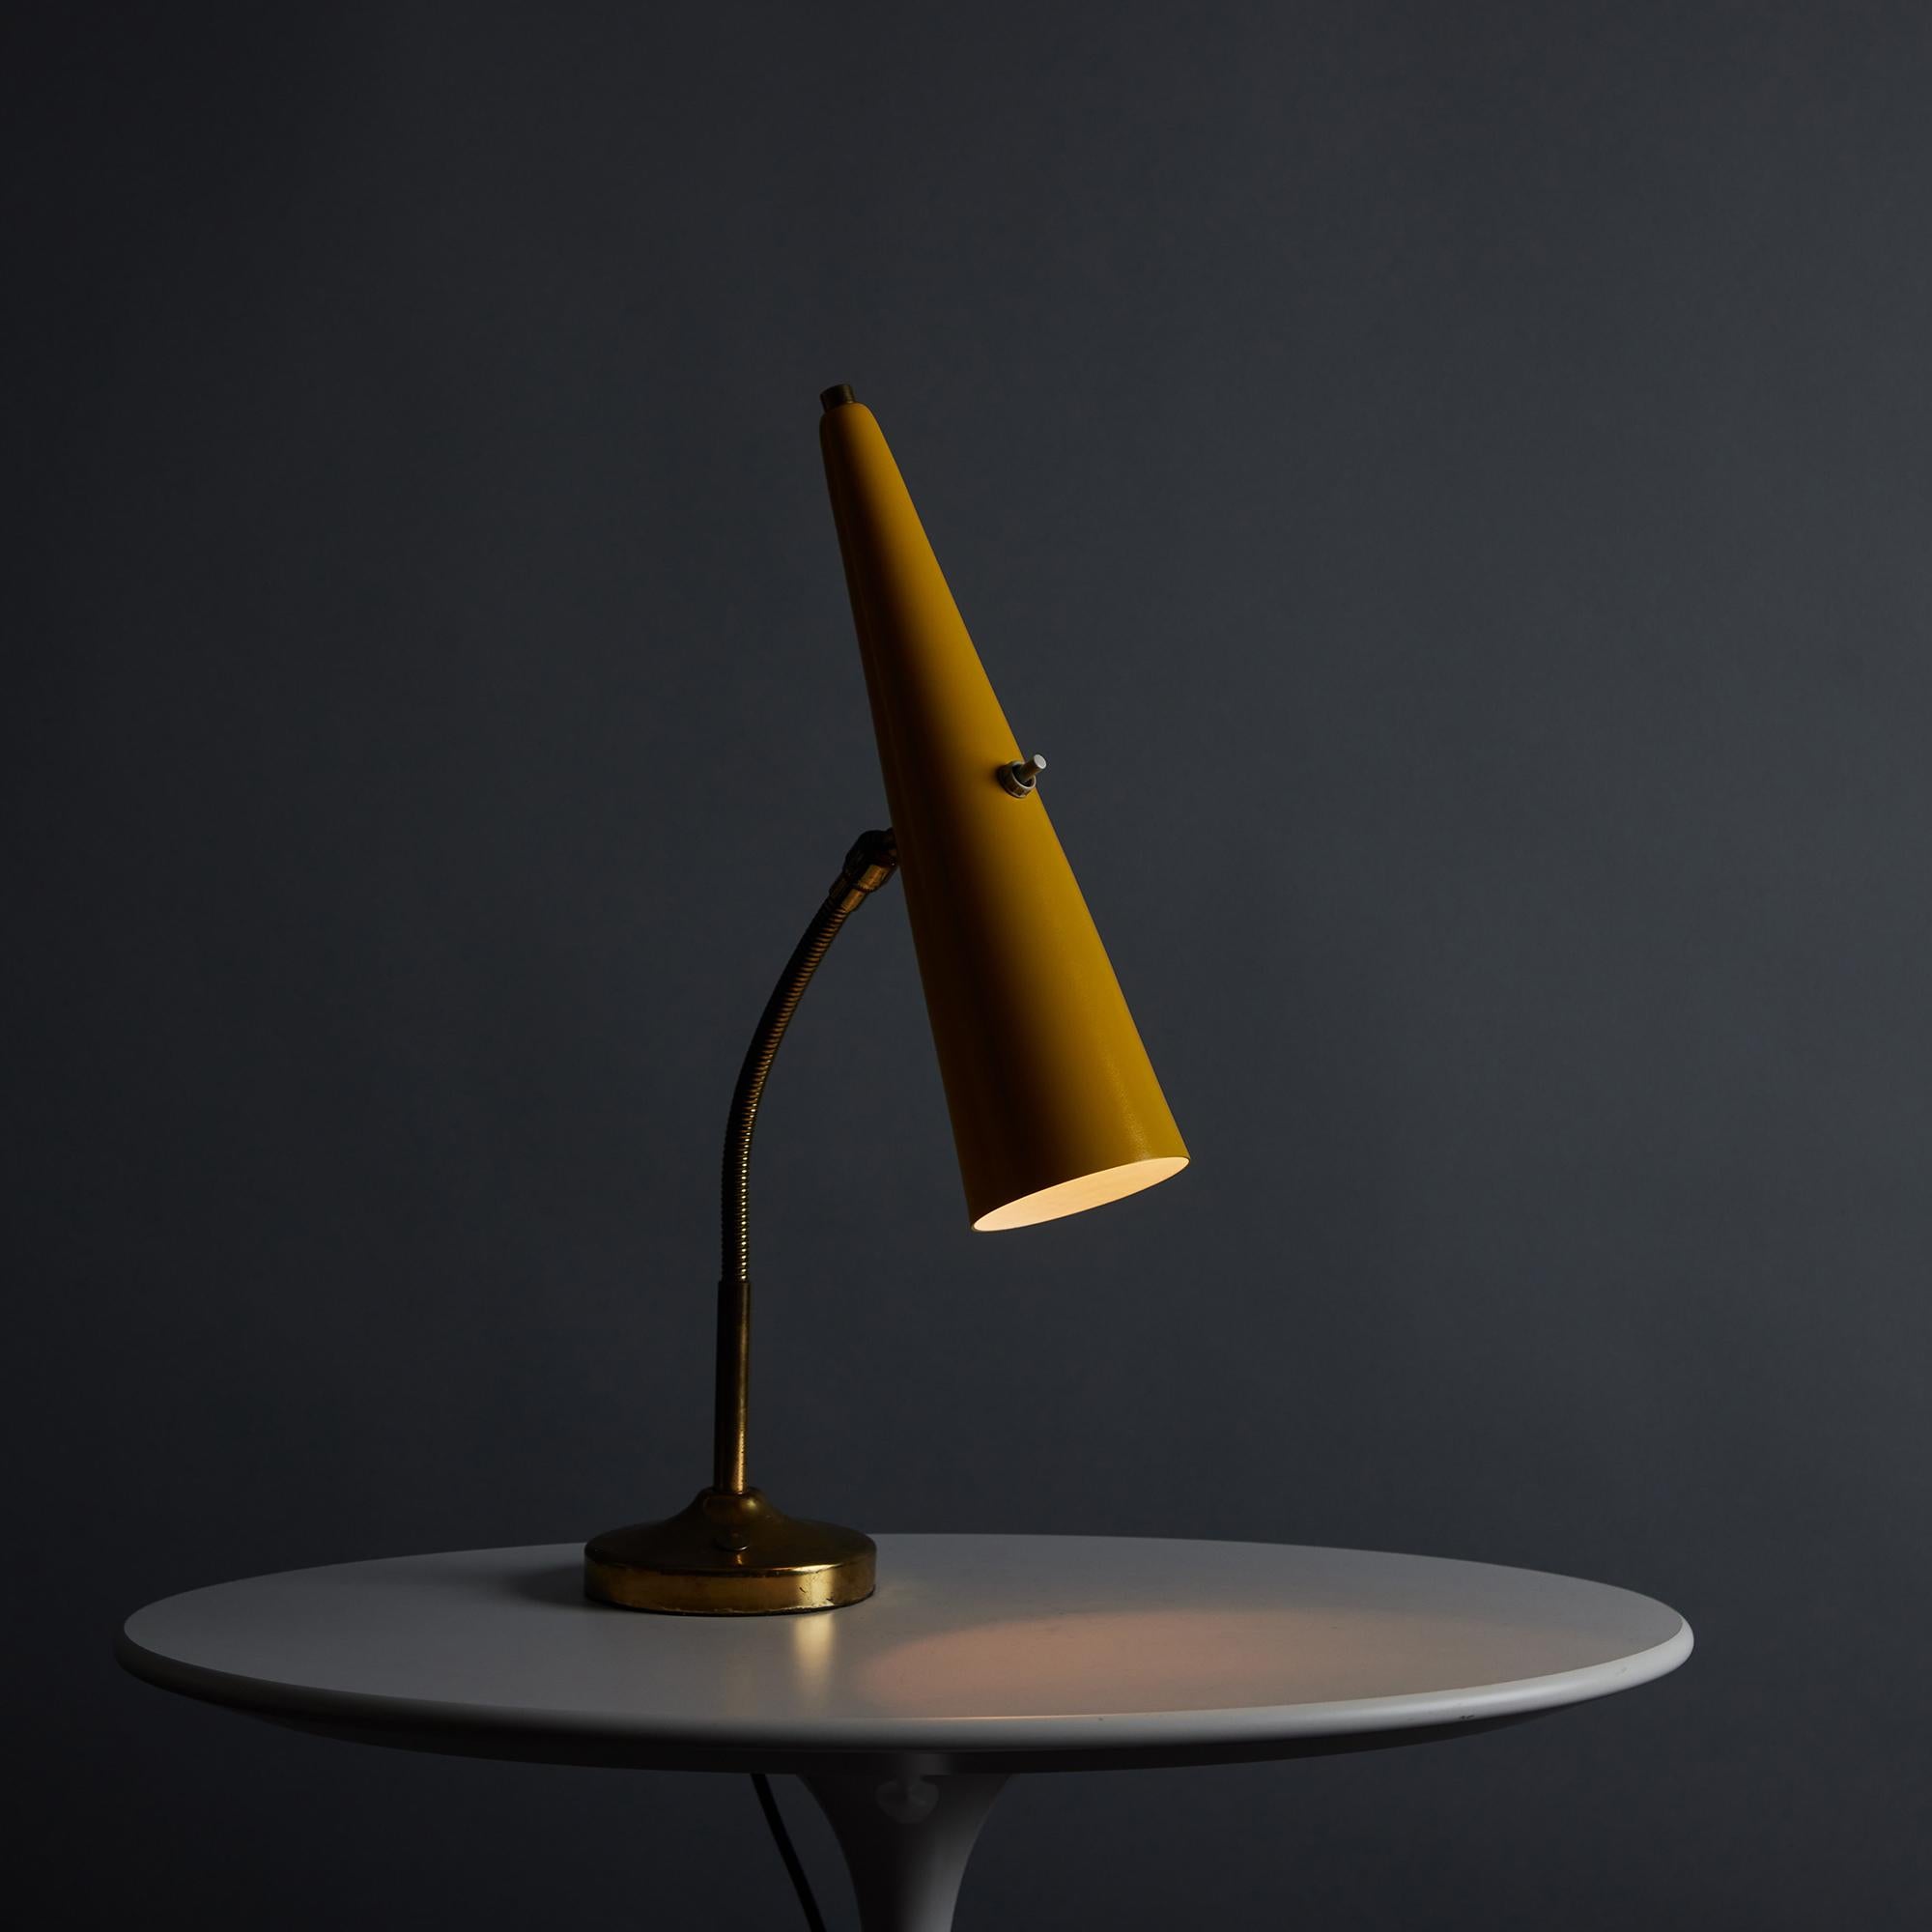 1960s Stilux Conical Yellow Metal and Brass Table Lamp. This quintessentially midcentury Italian table lamp is executed in a long conical yellow painted metal shade mounted on a patinated brass goose-neck arm with circular base in very good vintage